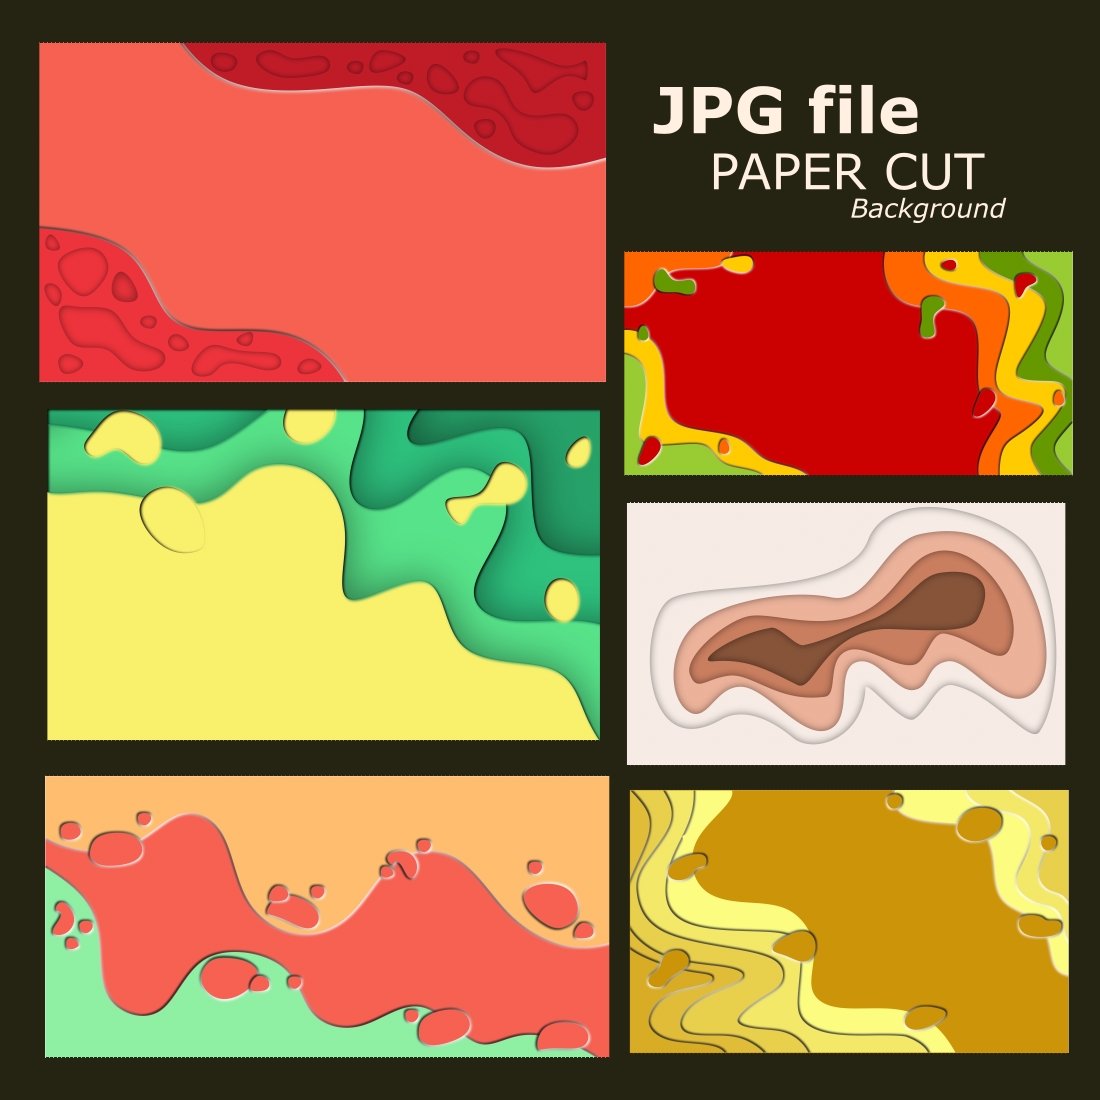 Six bundles of abstract paper cut slime background with copy spaces, files as JPG preview image.